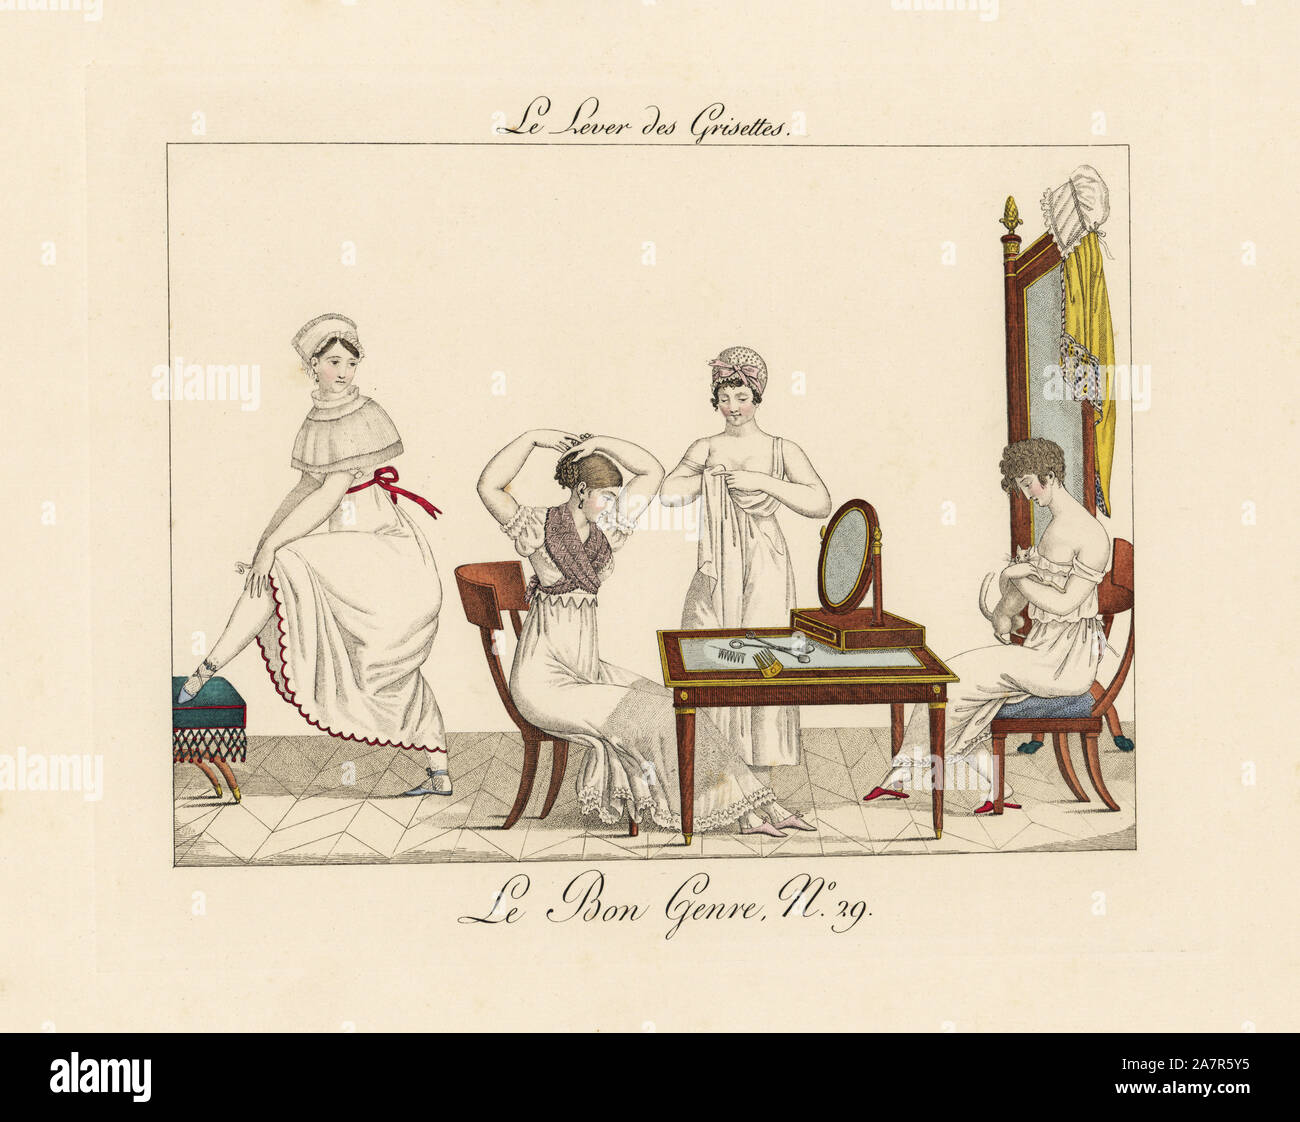 Shop girls dressing in the morning. Four shop girls dressing, fixing their hair in front of mirror, adjusting their stockings, playing with a cat. 'These little workers show such ingenious coquetry. They wear ordinary negliges, but have the art to add value to simple things.' Handcoloured engraving from Pierre de la Mesangere's Le Bon Genre, Paris, 1817. Stock Photo